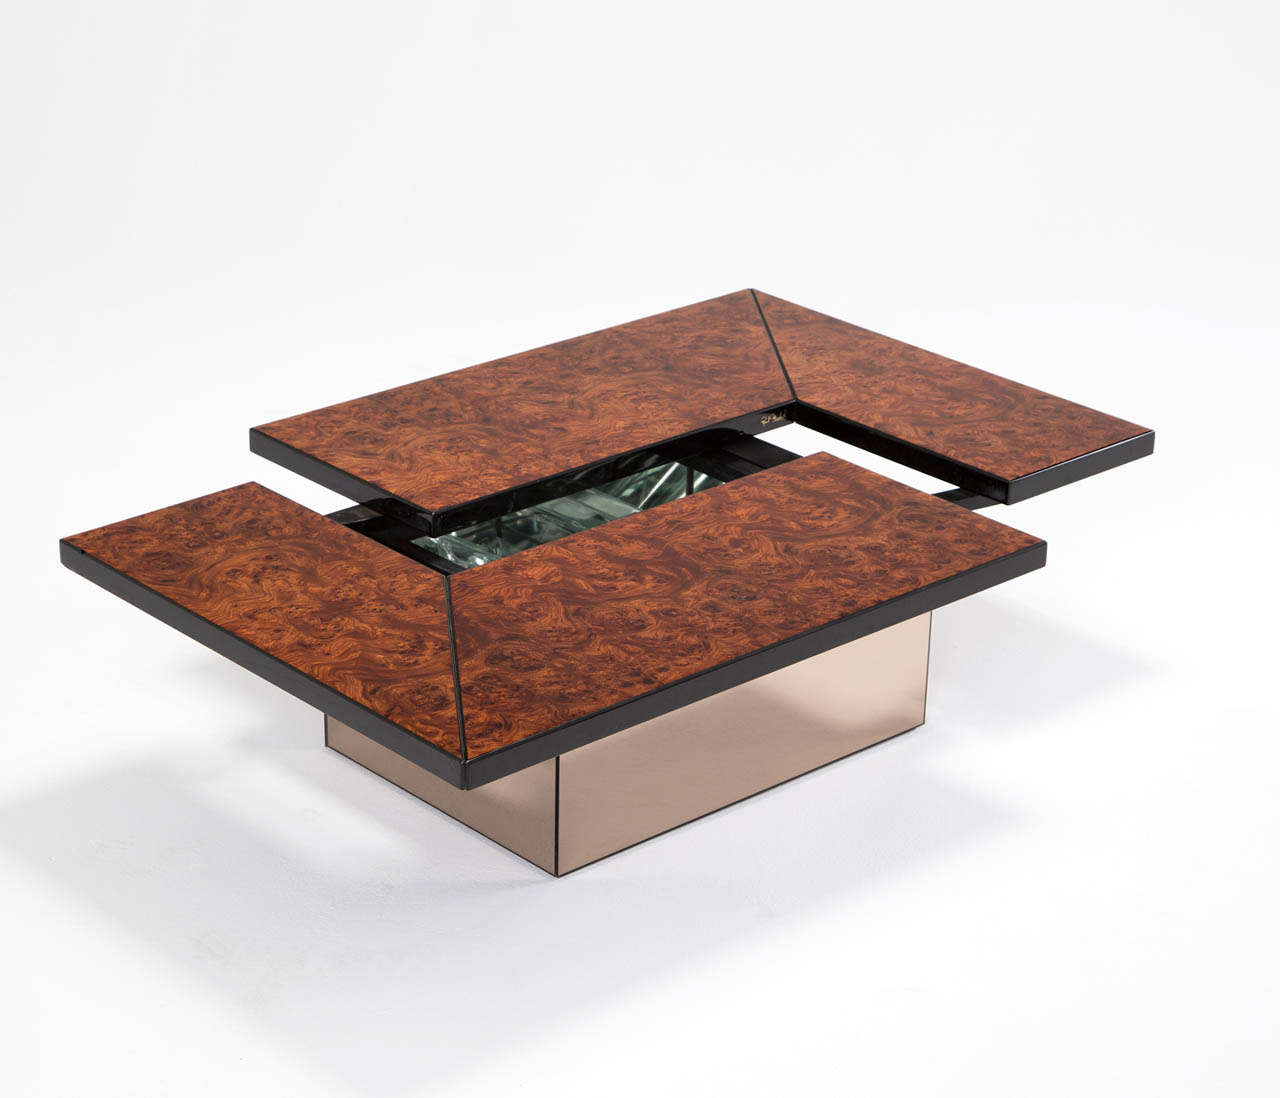 Interesting Willy Rizzo style coffee table with adjustable top which reveals a liquor storage or dry bar hidden inside. The top is veneered with dark walnut burl veneer and smoked mirror base.
Worldwide shipping possibilities: 
For competitive